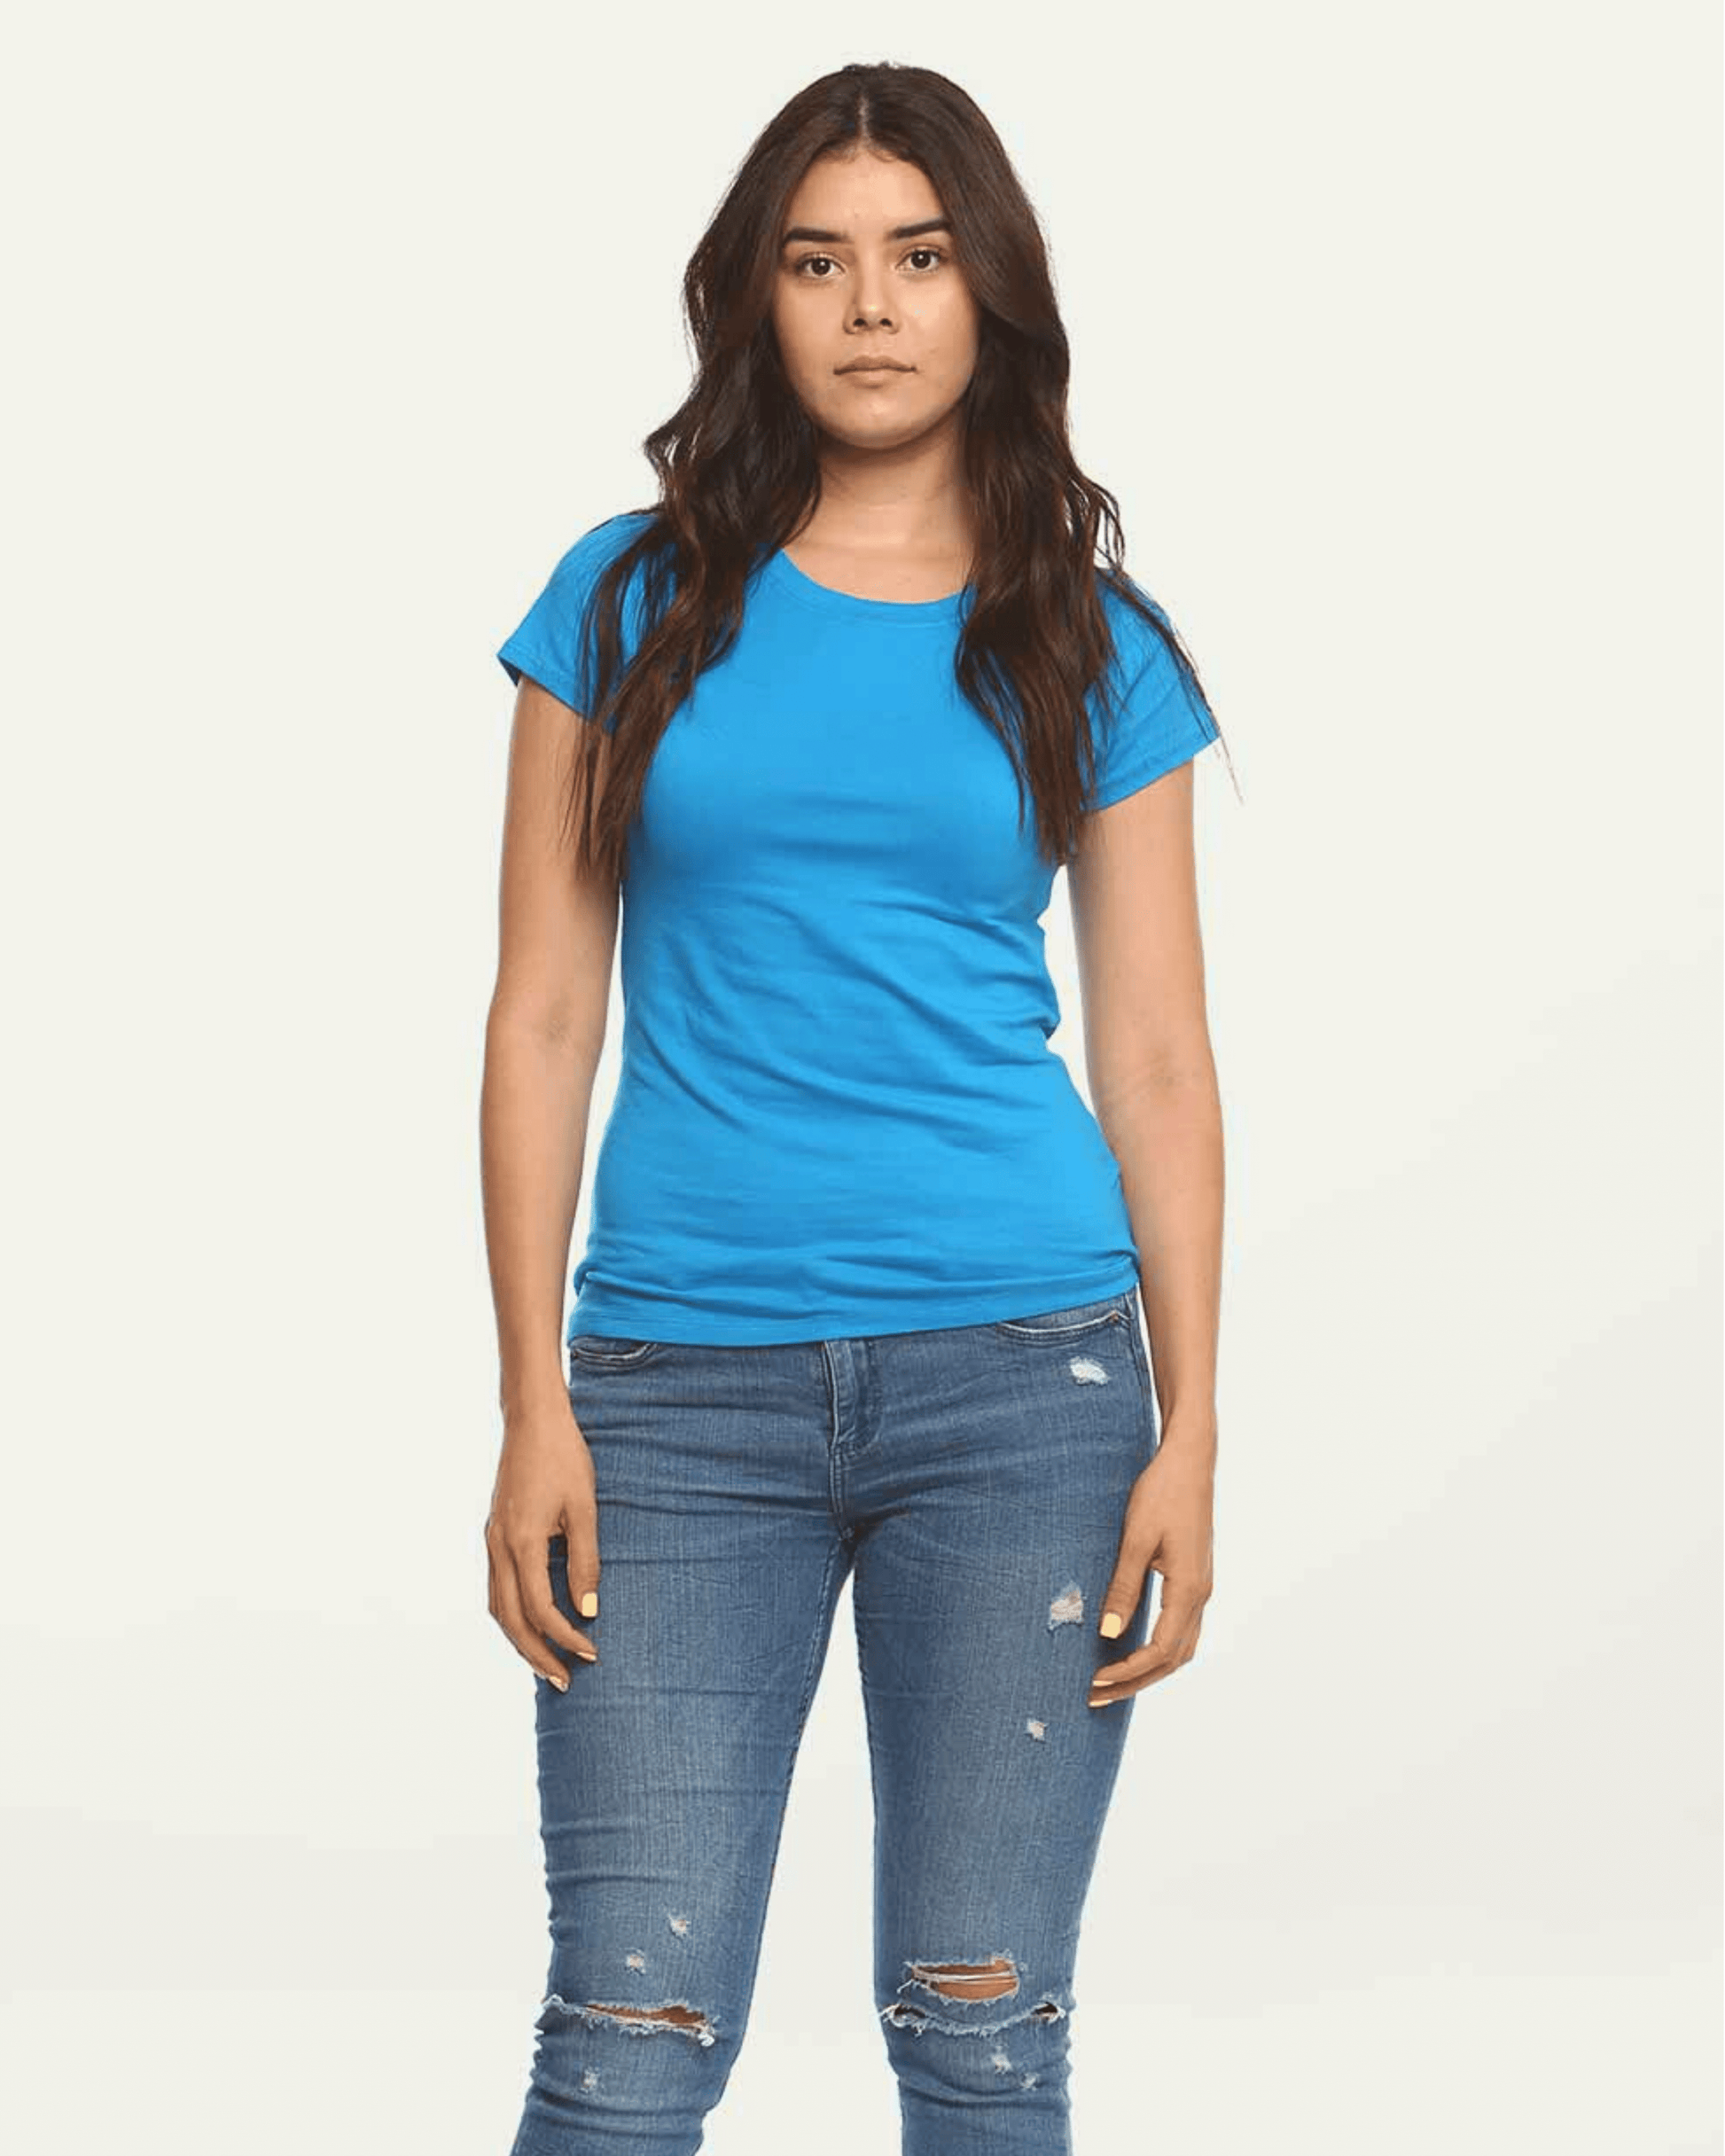 Woman wearing a Turquoise Suna Cotton® Ladies Junior Fit T-shirt